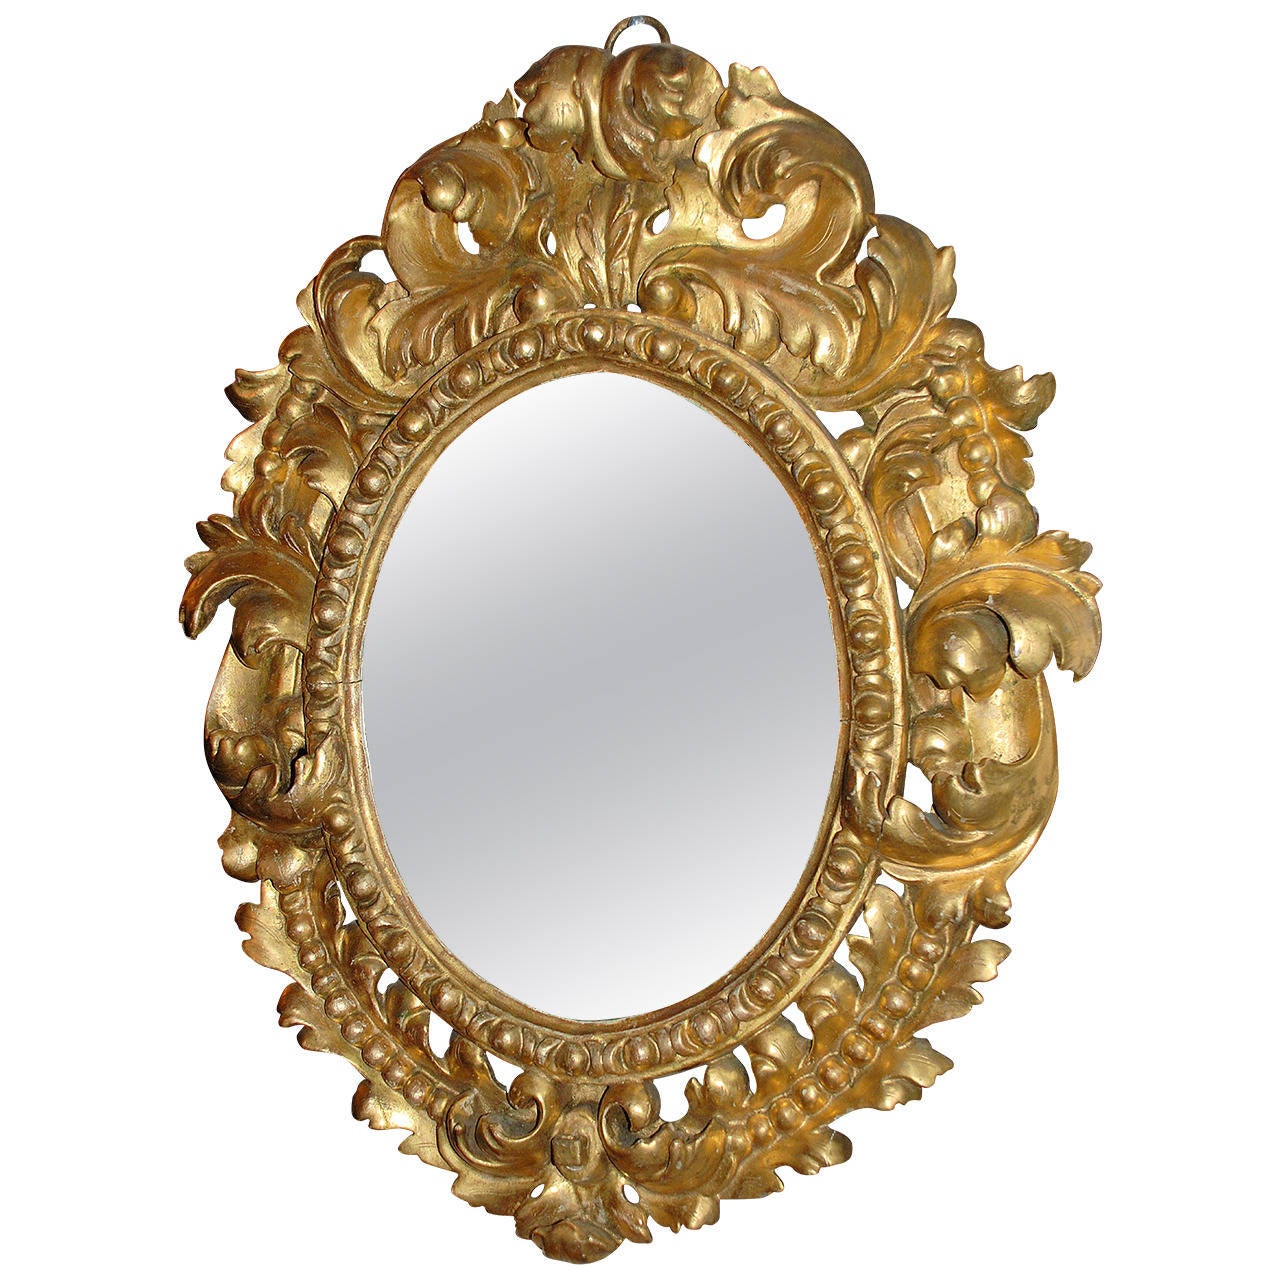 Antique French Rococo Gesso Mirror at 1stdibs